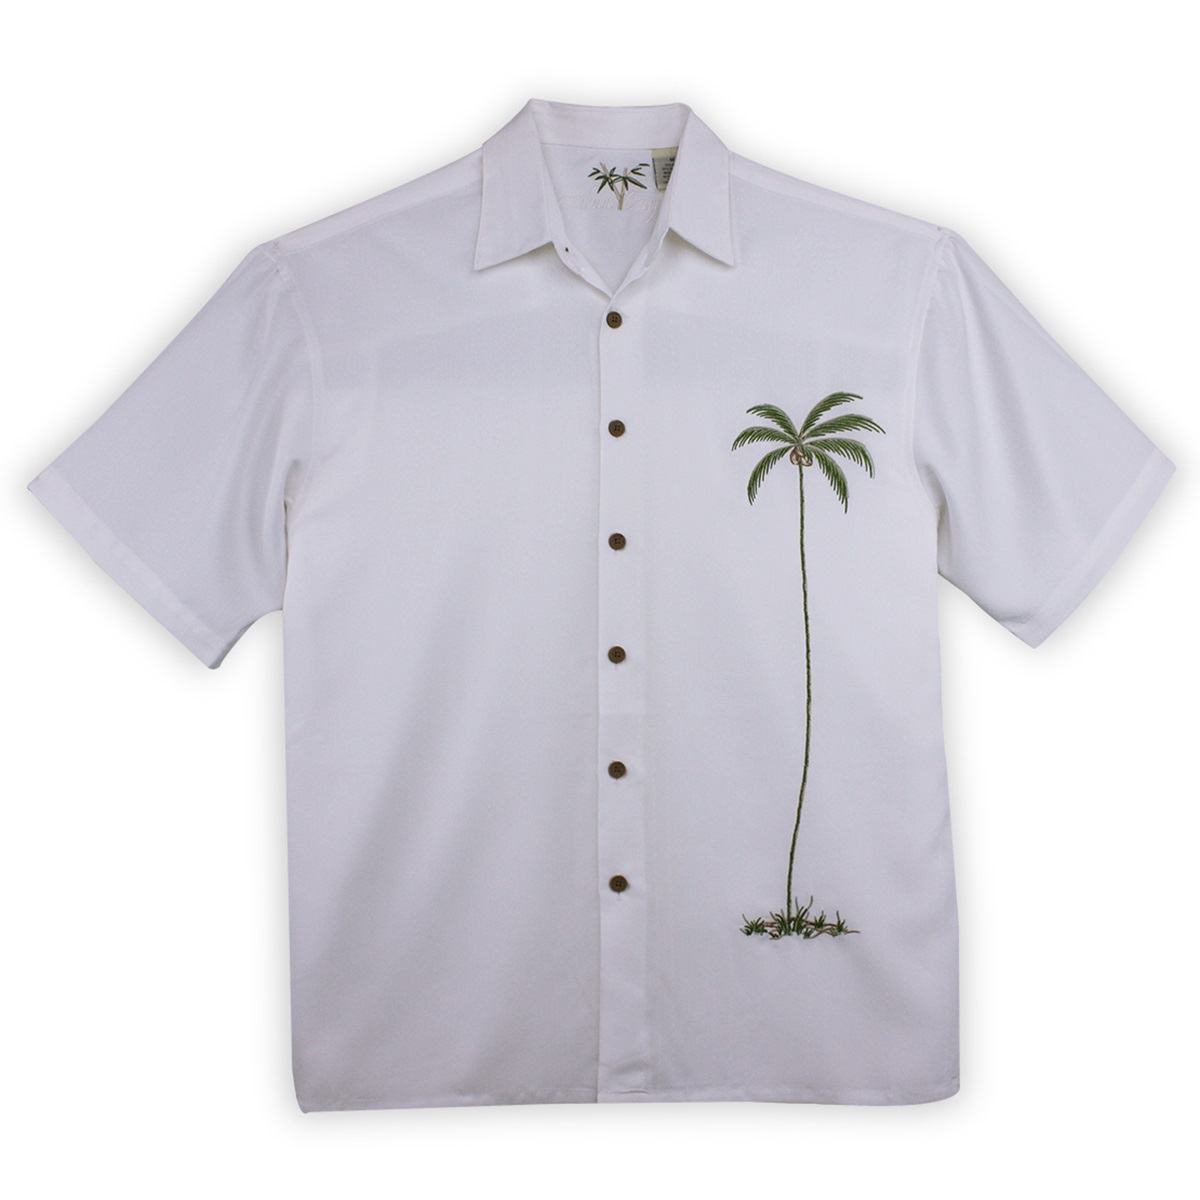 bamboo-cay-mens-shirt-tranquility-white